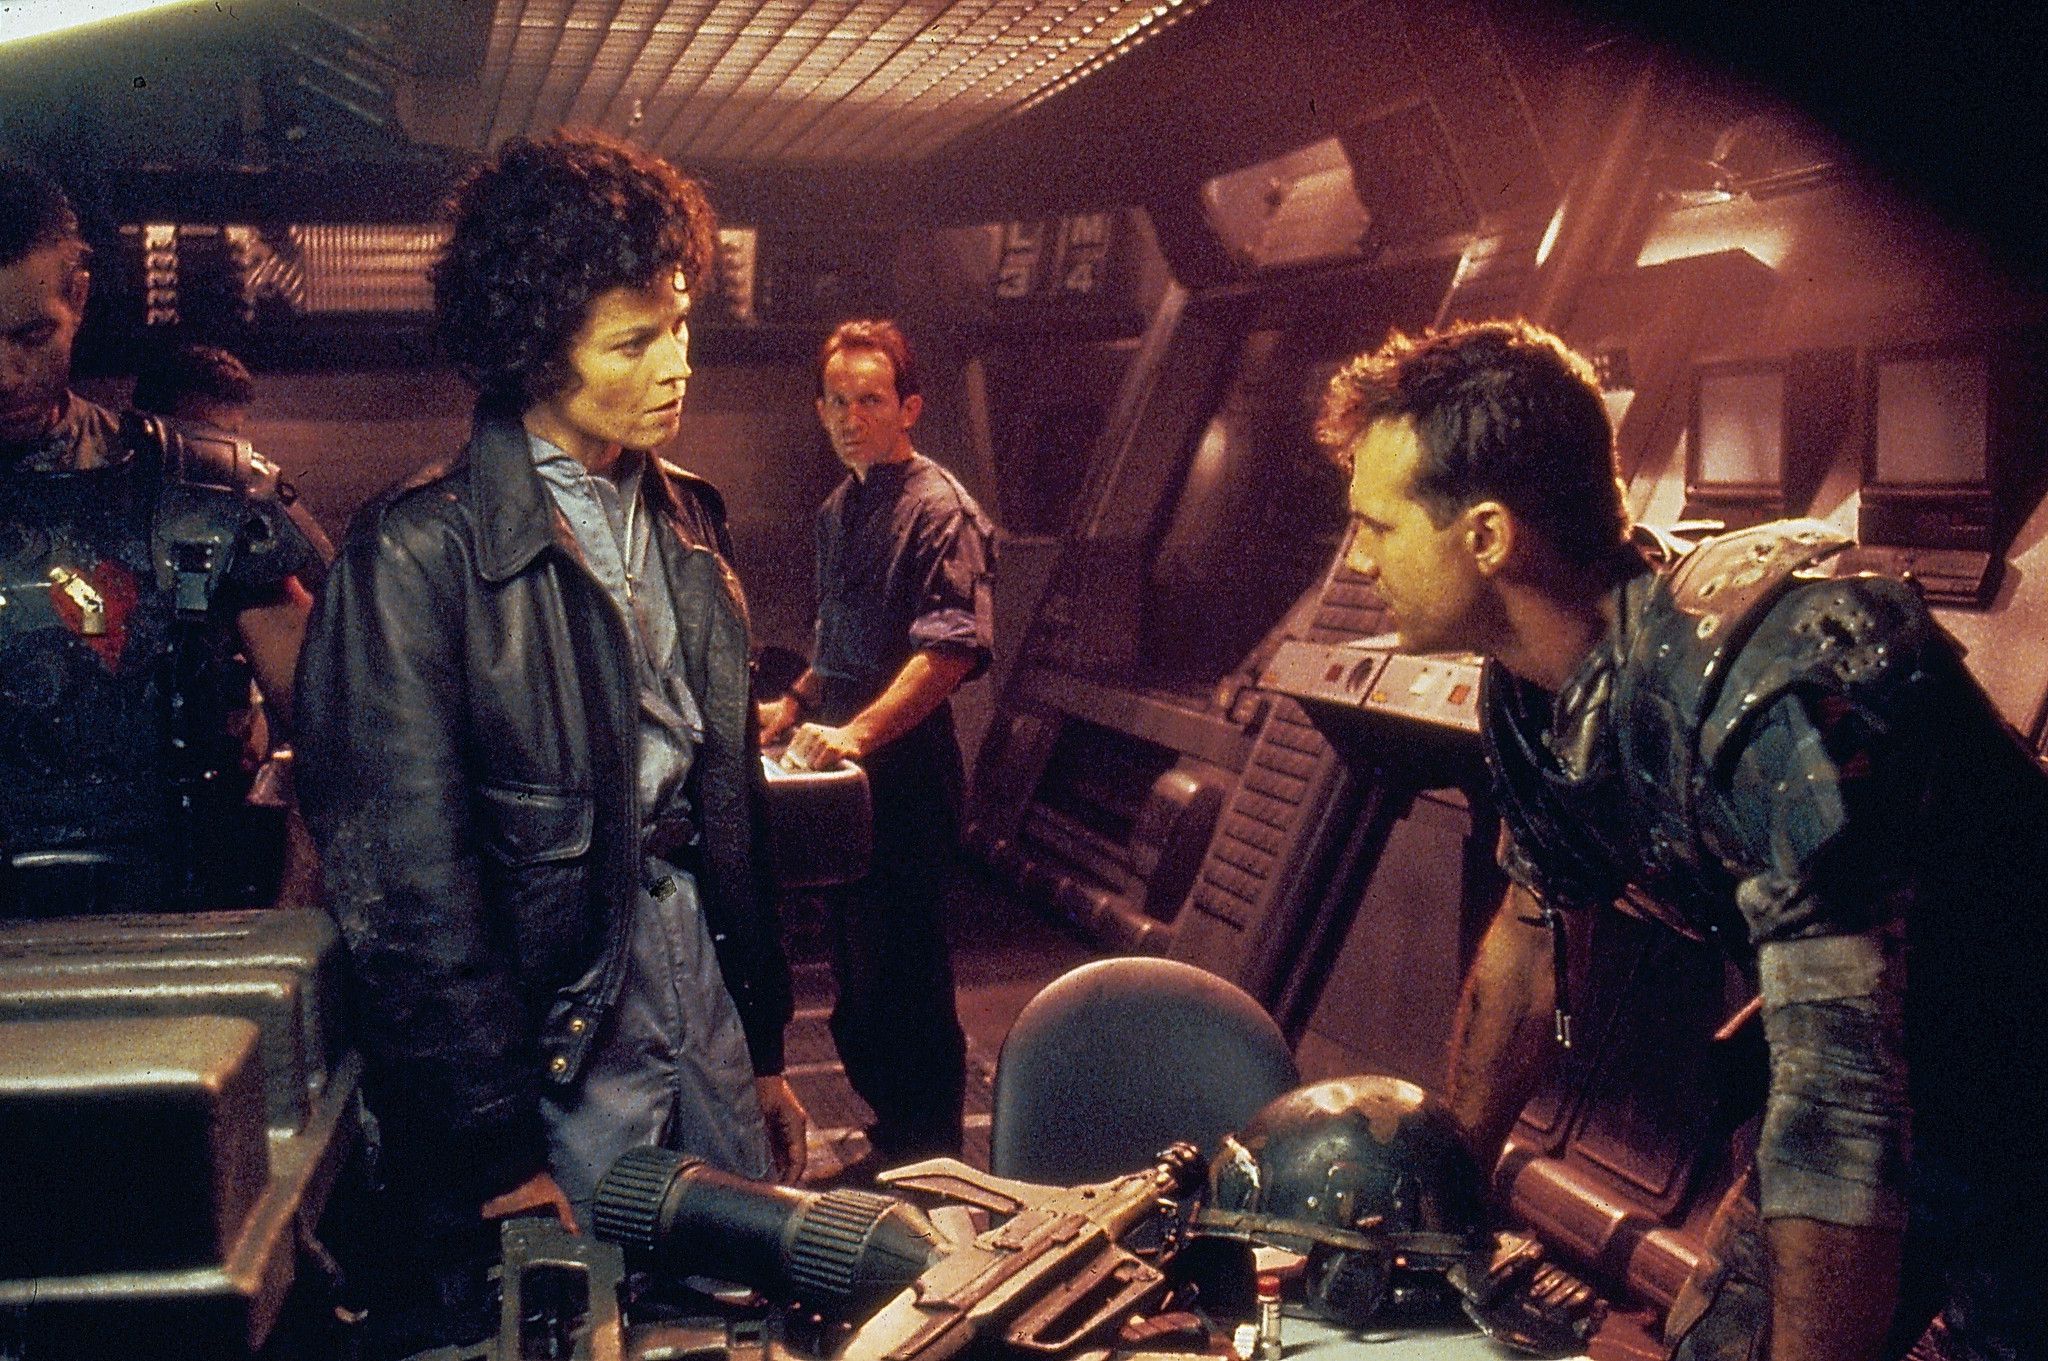 Movies on TV this week Sept. 15, 2019: 'Alien,' 'Aliens' and more